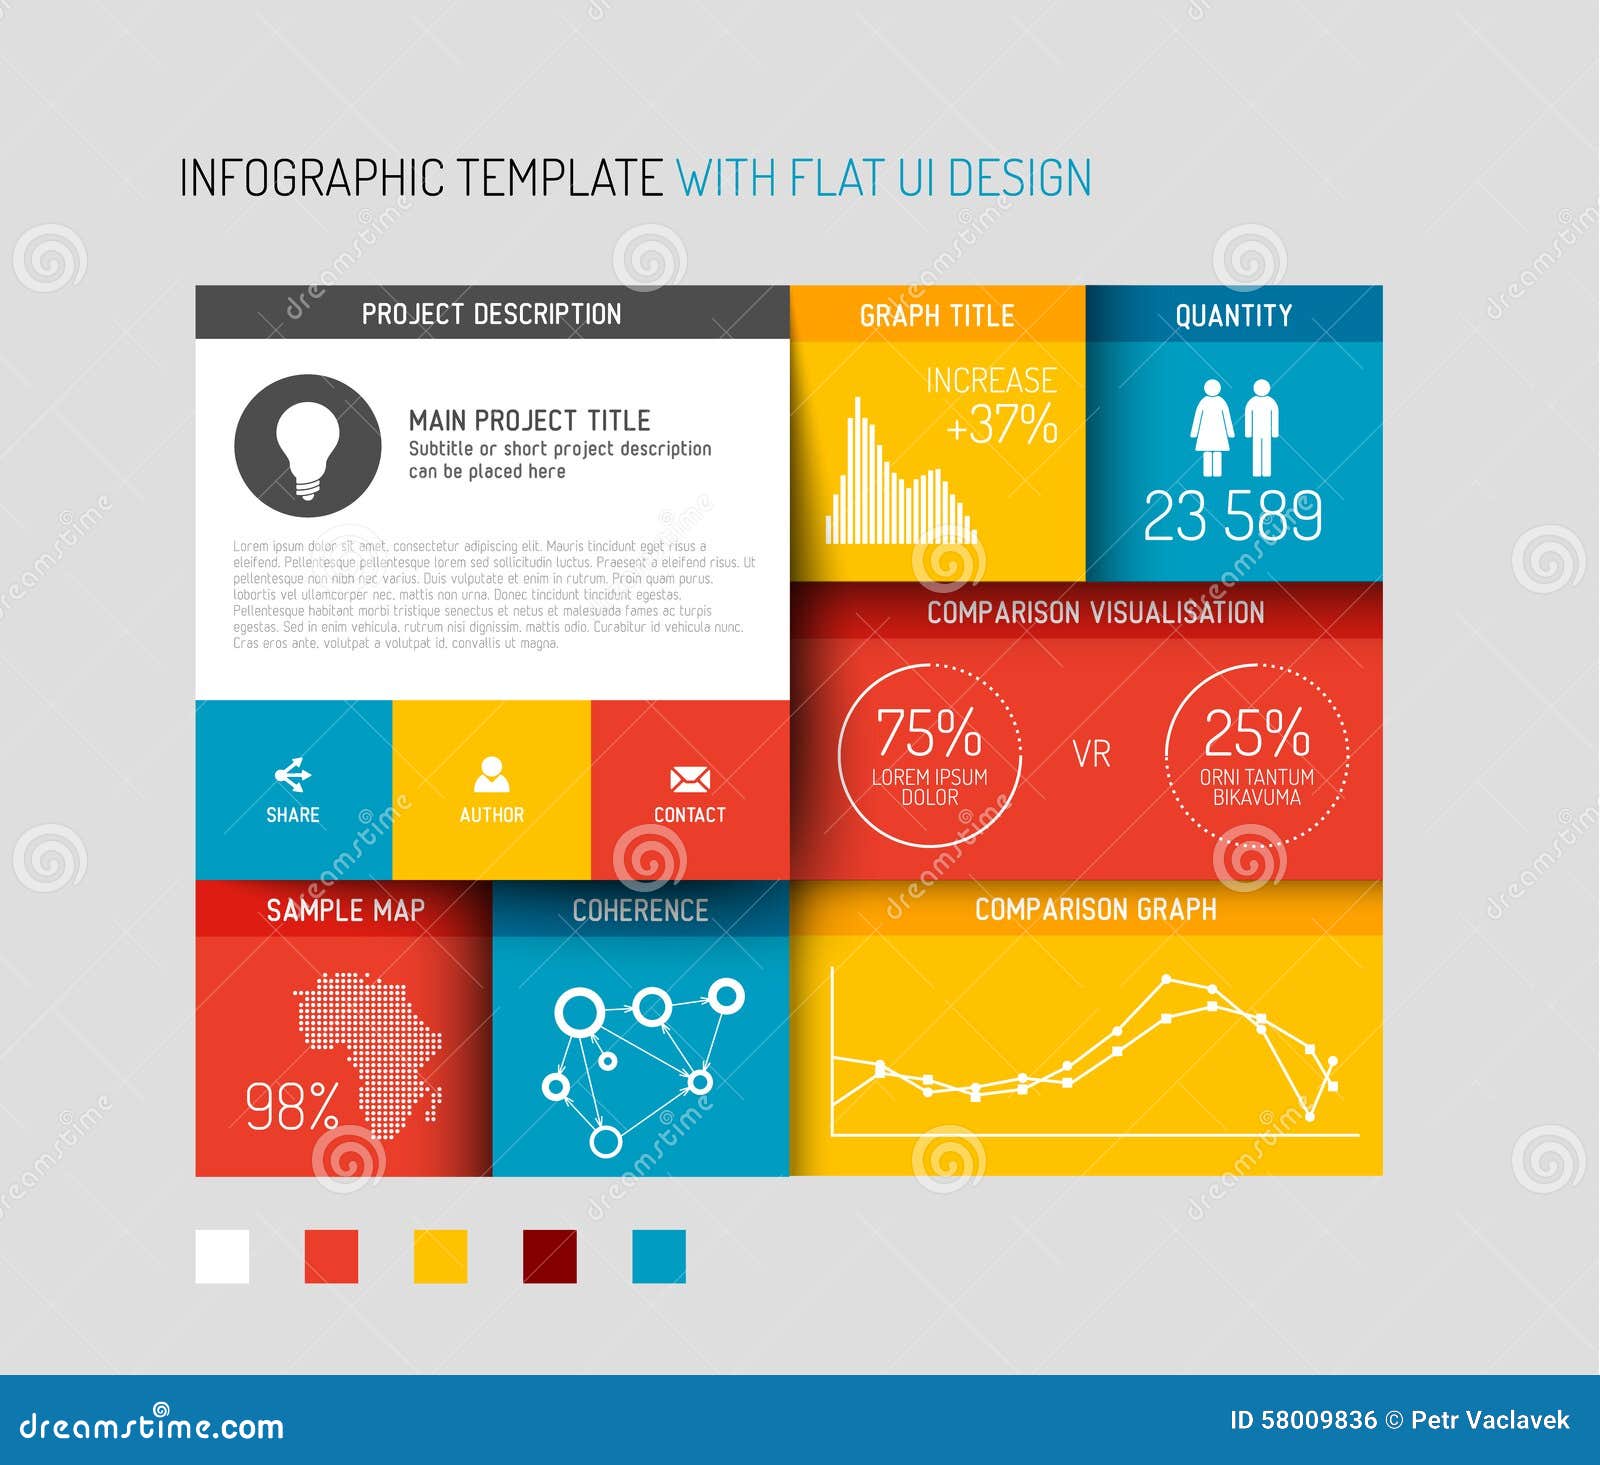 Download Vector Flat User Interface (UI) Infographic Template ...